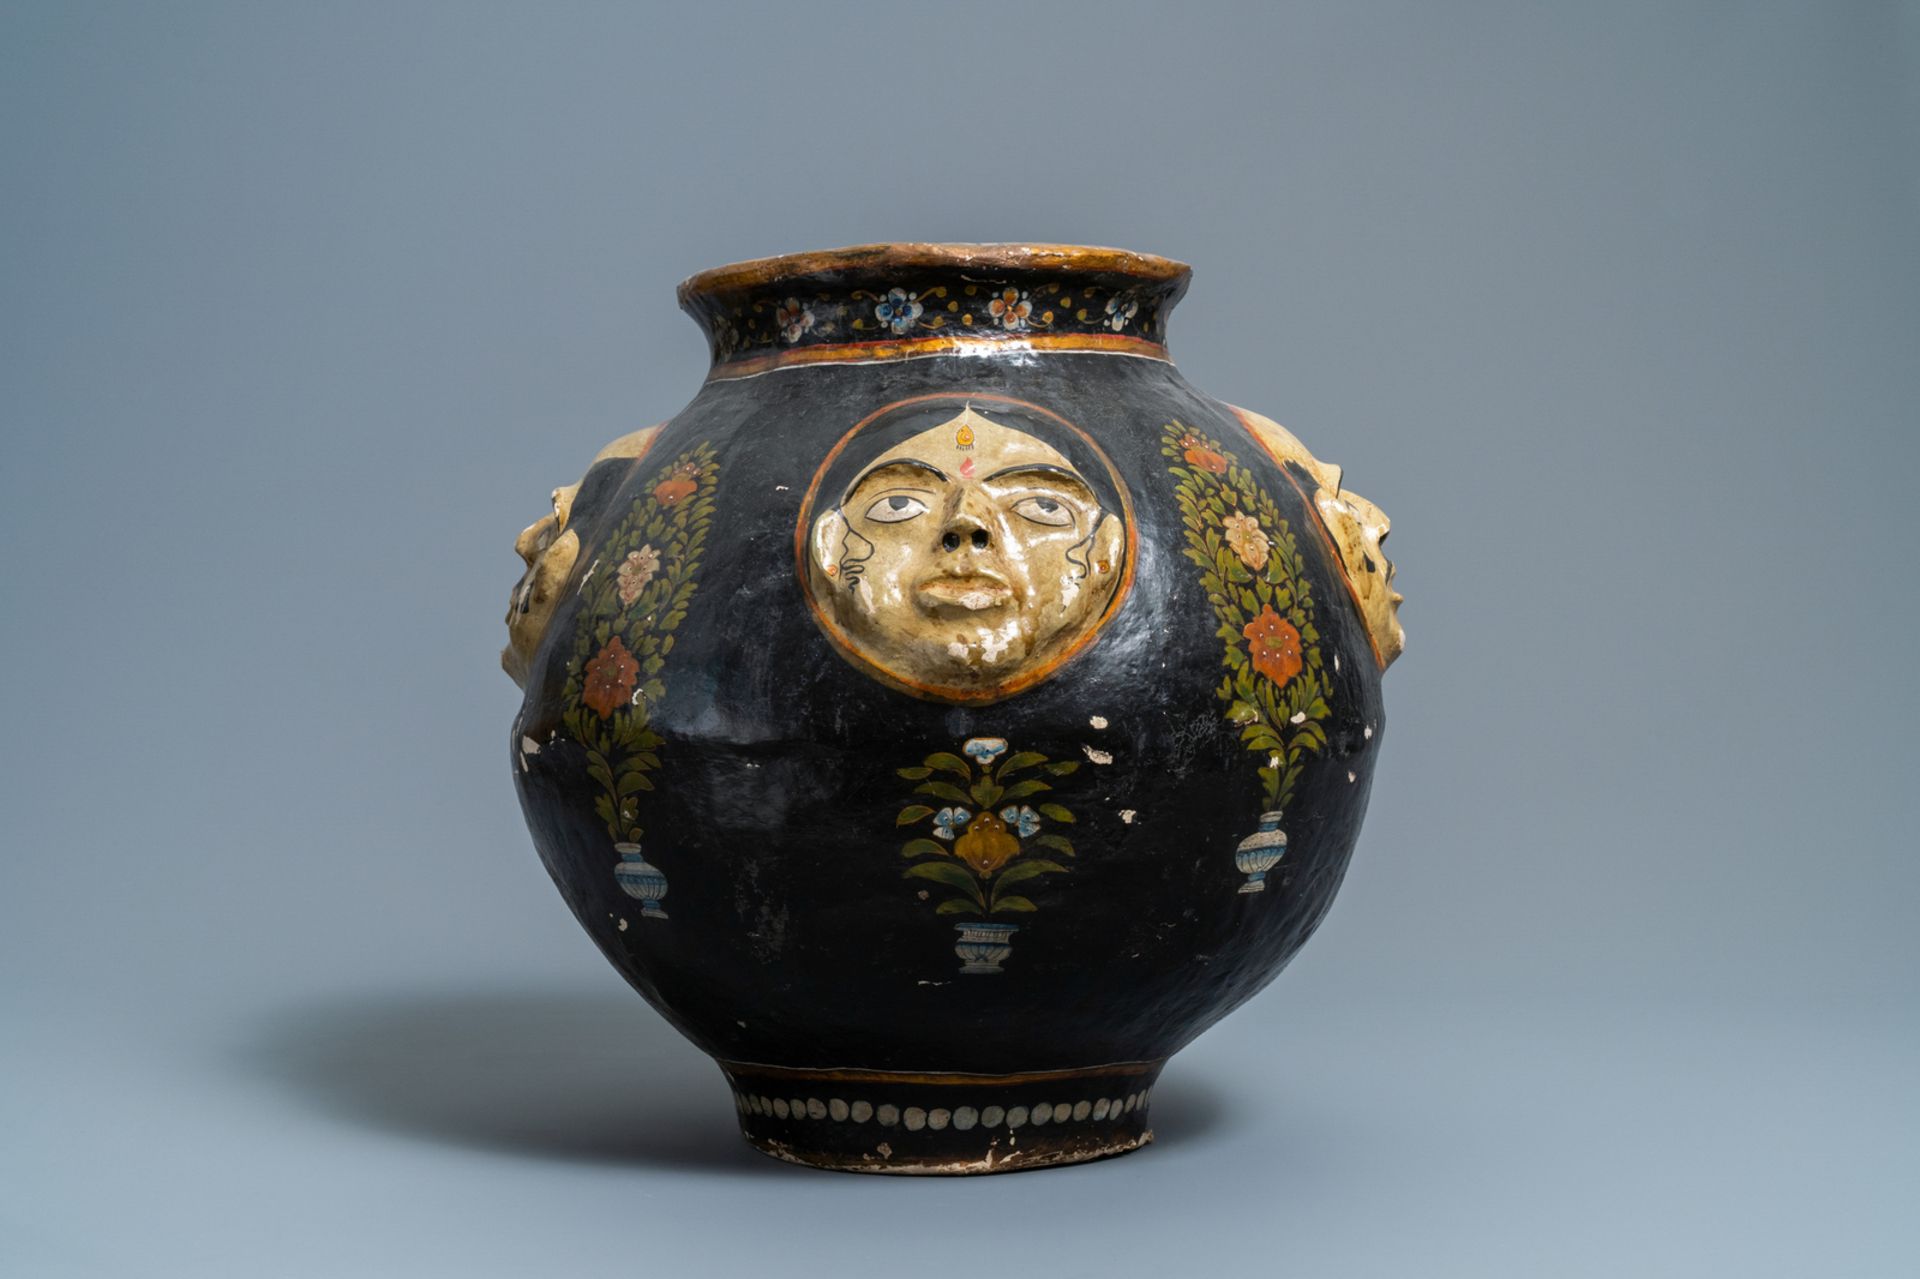 A relief-decorated papier-mache vase with four faces, Kashmir, India, 19th C. - Image 6 of 8